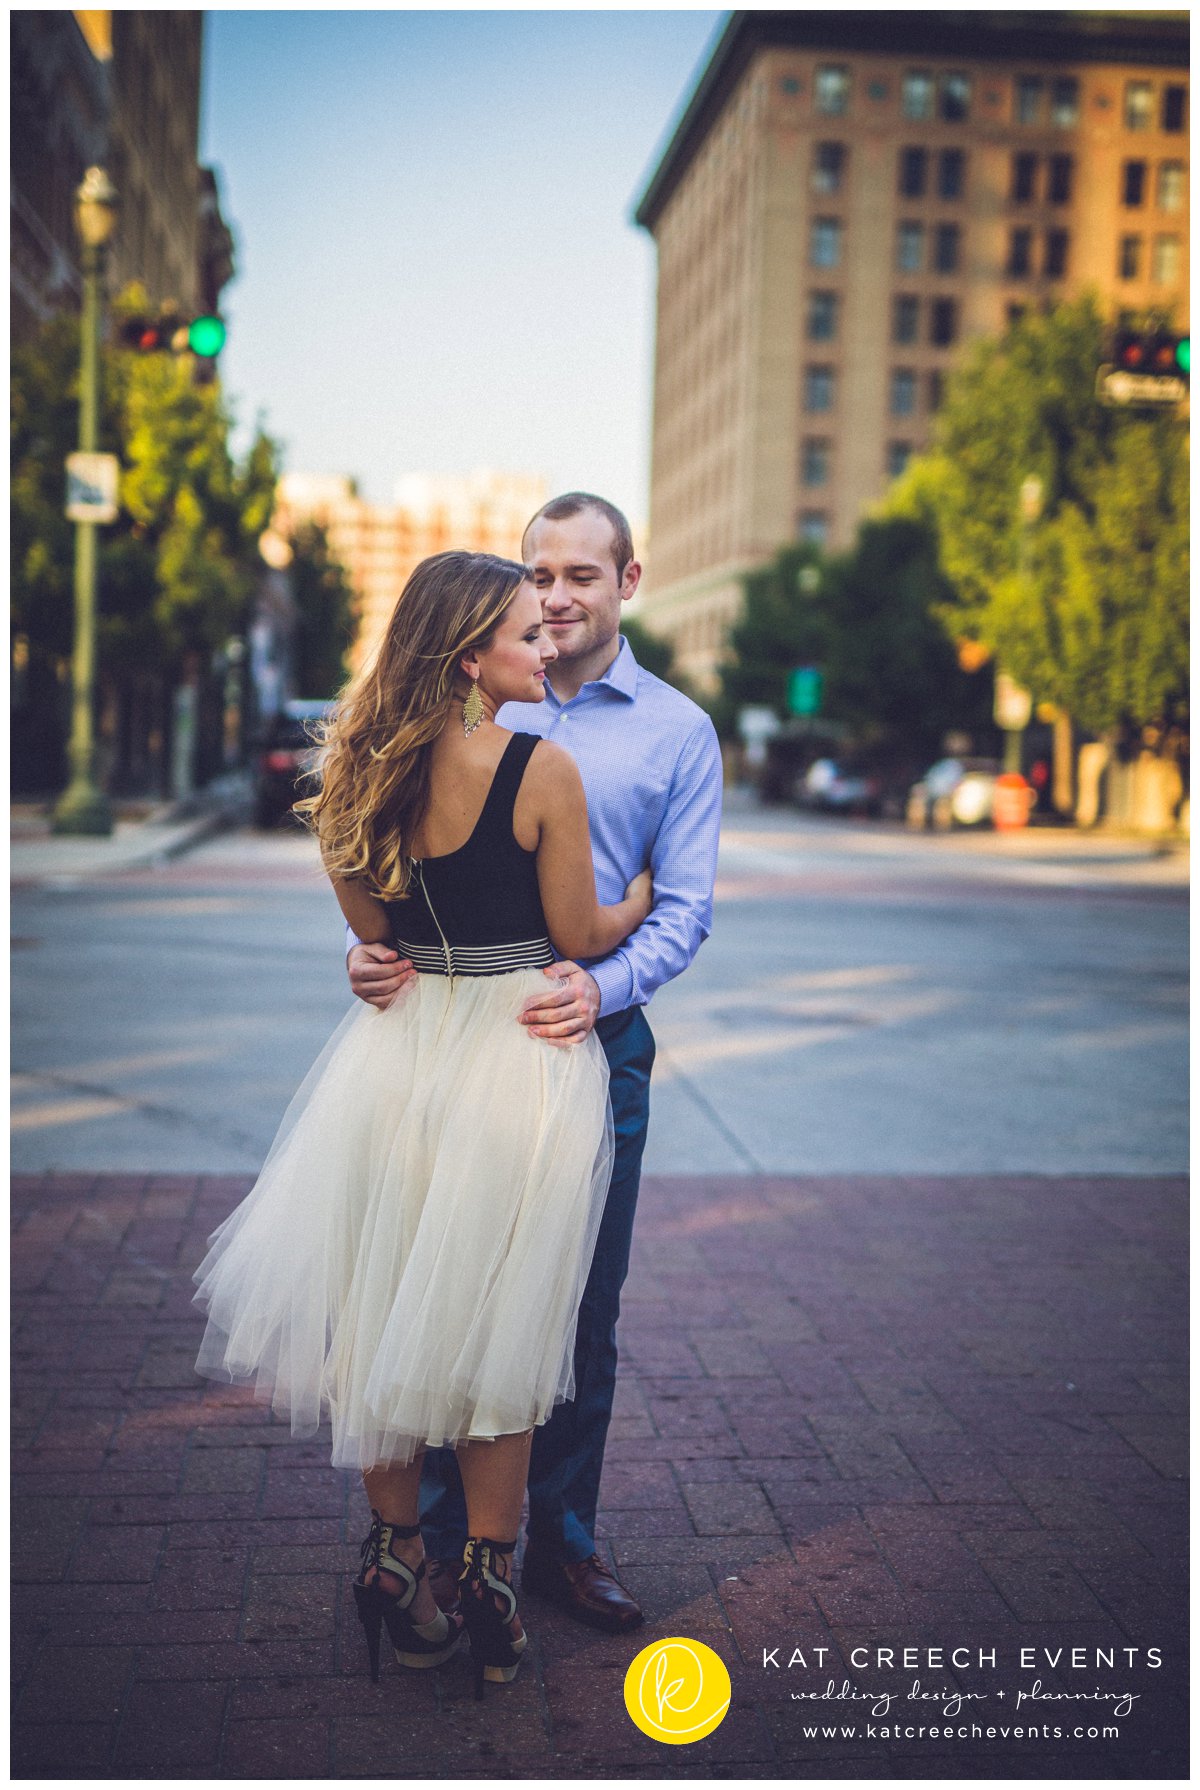 Urband Engagement Session | Kat Creech Events